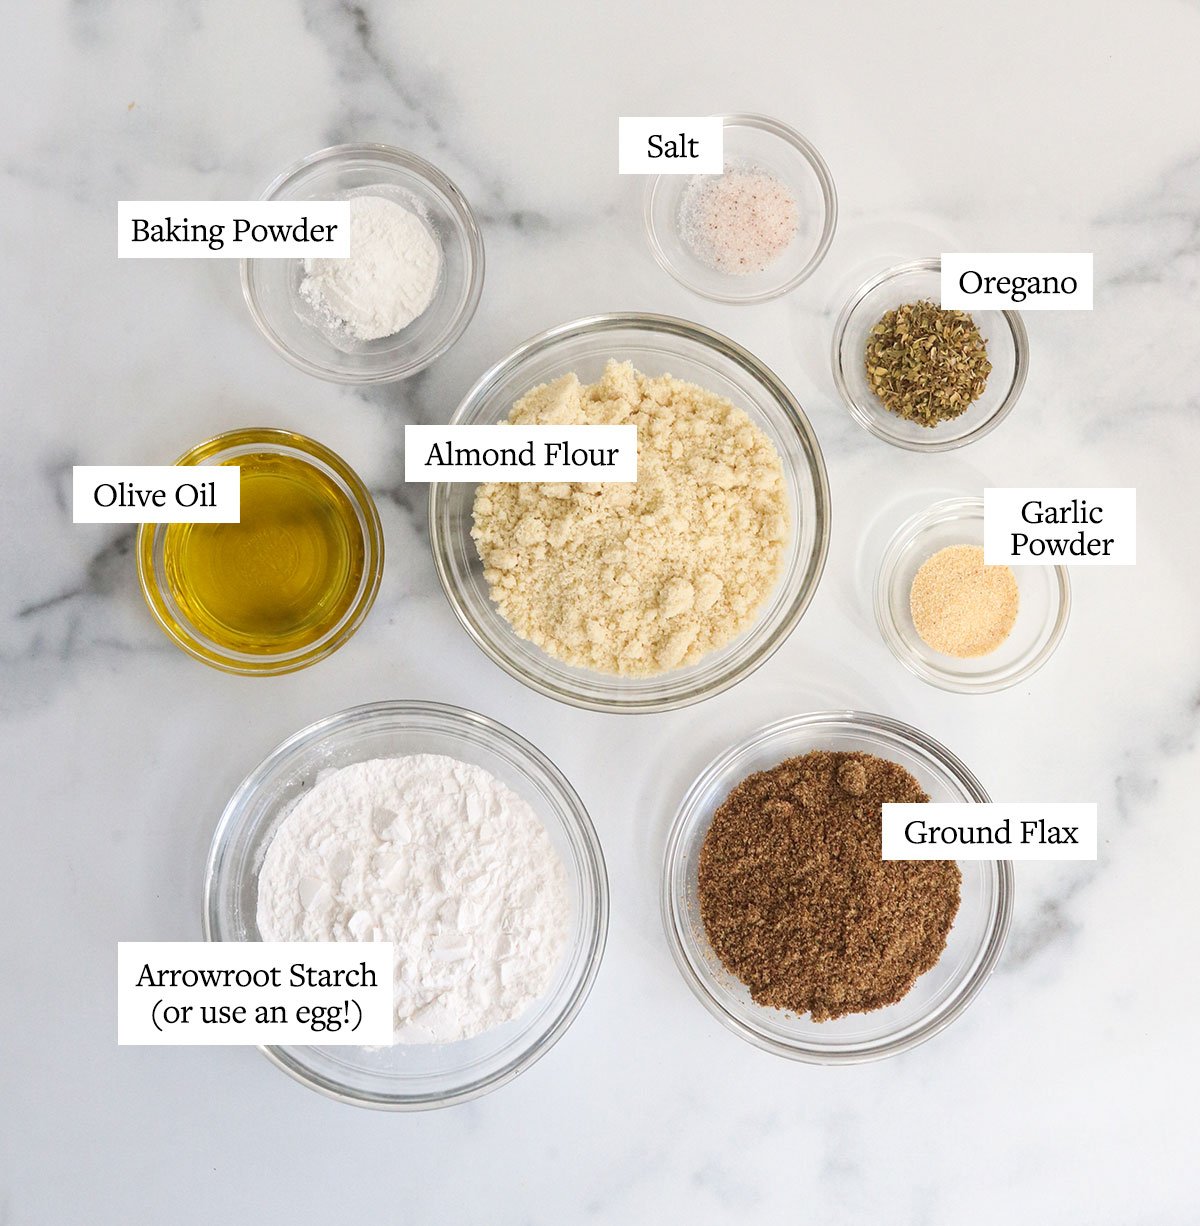 almond flour pizza crust ingredients labeled on white surface.